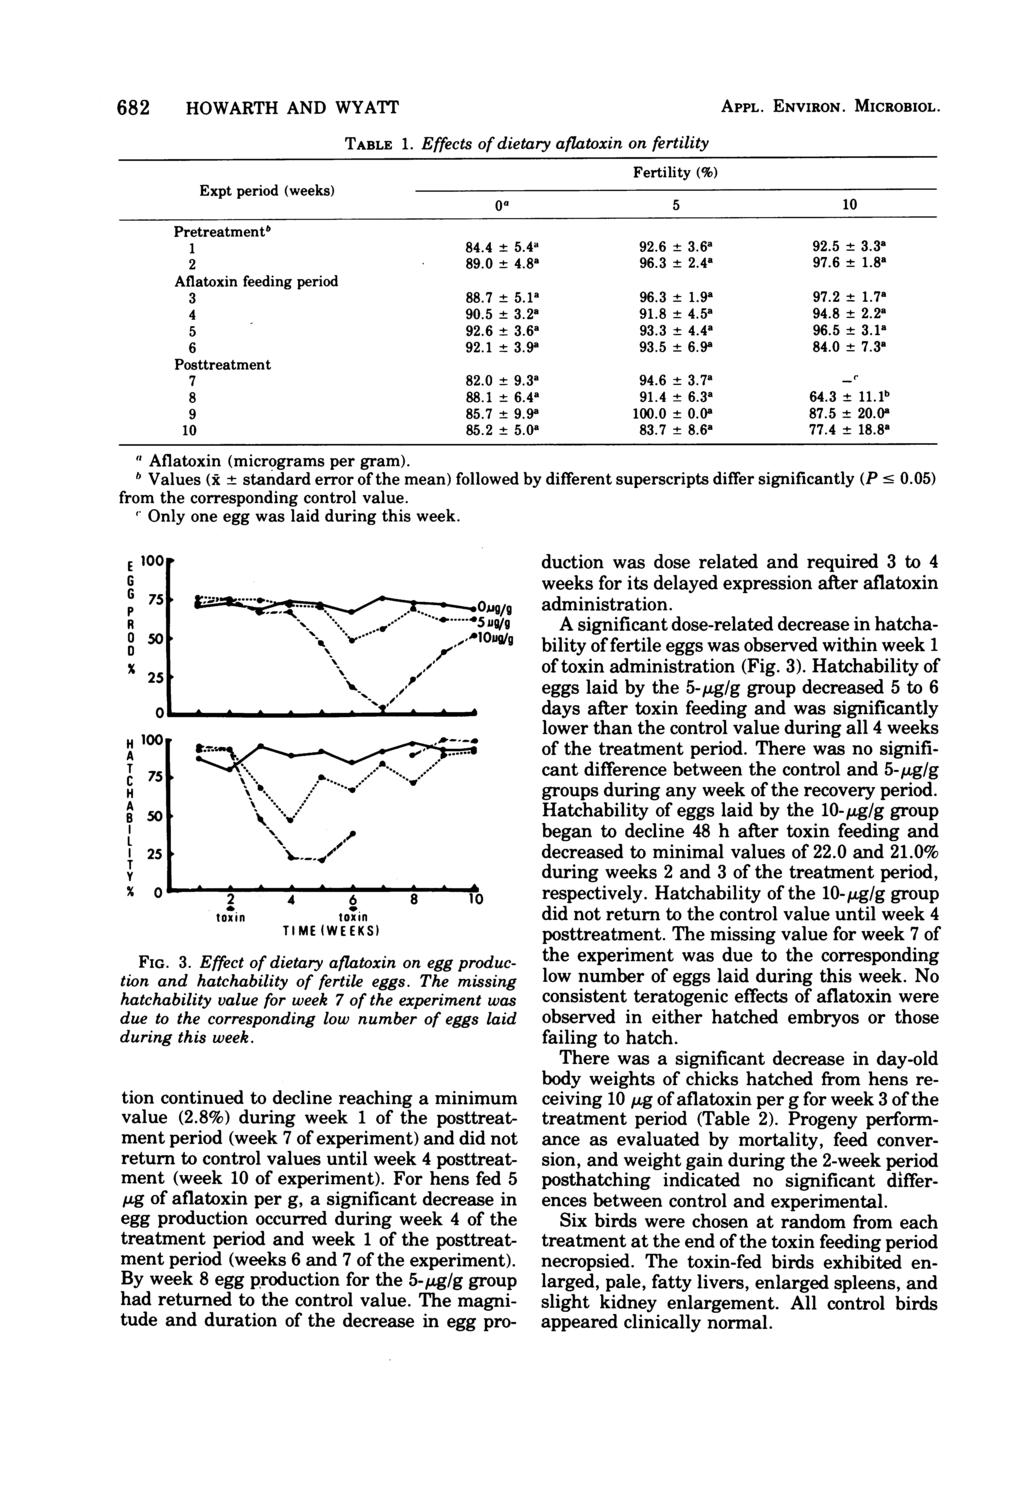 682 HOWARTH AND WYArfT TABLE 1. Effects of dietary afta on fertility Fertility (%) Expt period (weeks) Oa 5 1 Pretreatmentb 1 84.4 ± 5.4a 92.6 ± 3.6a 92.5 ± 3.3a 2 89. t 4.8a 96.3 ± 2.44a 97.6 ± 1.